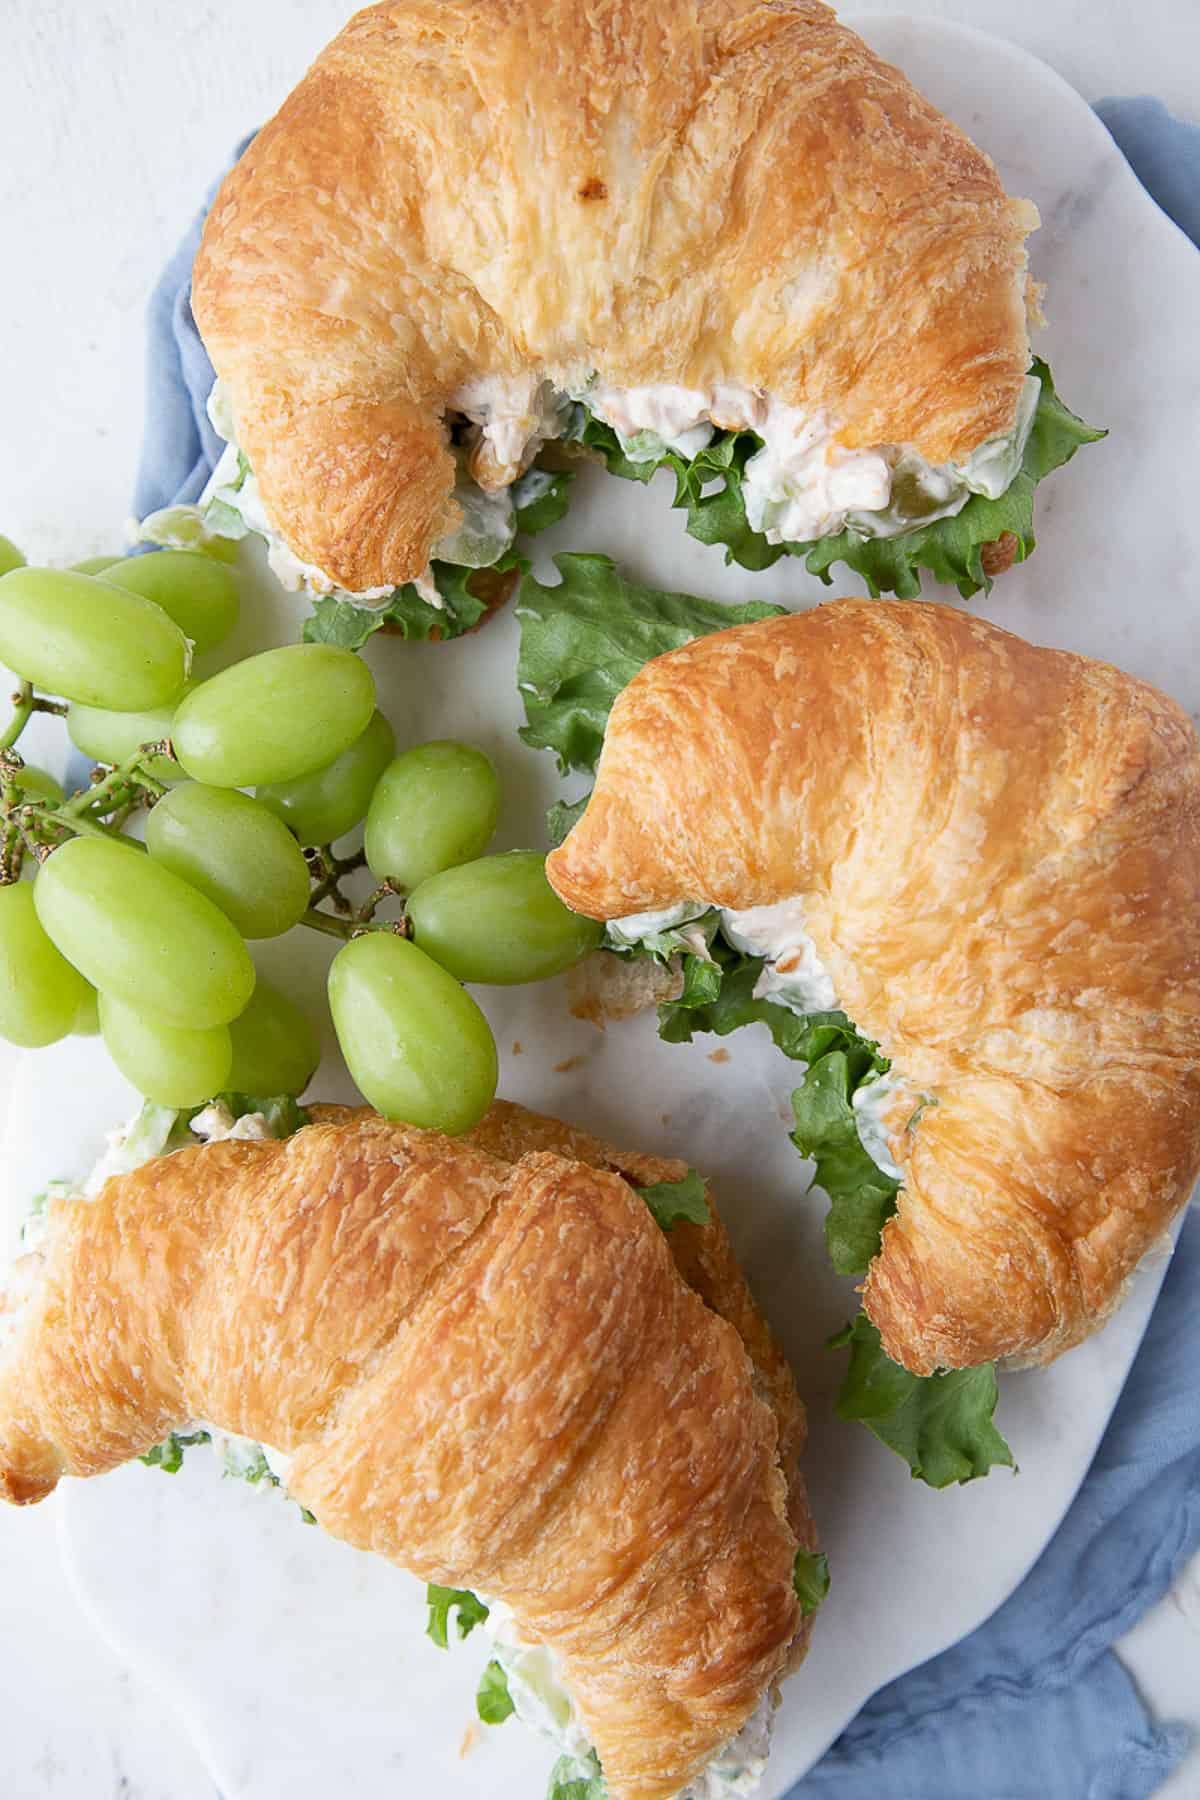 three croissants filled with chicken salad, next to a bunch of green grapes on a white platter.